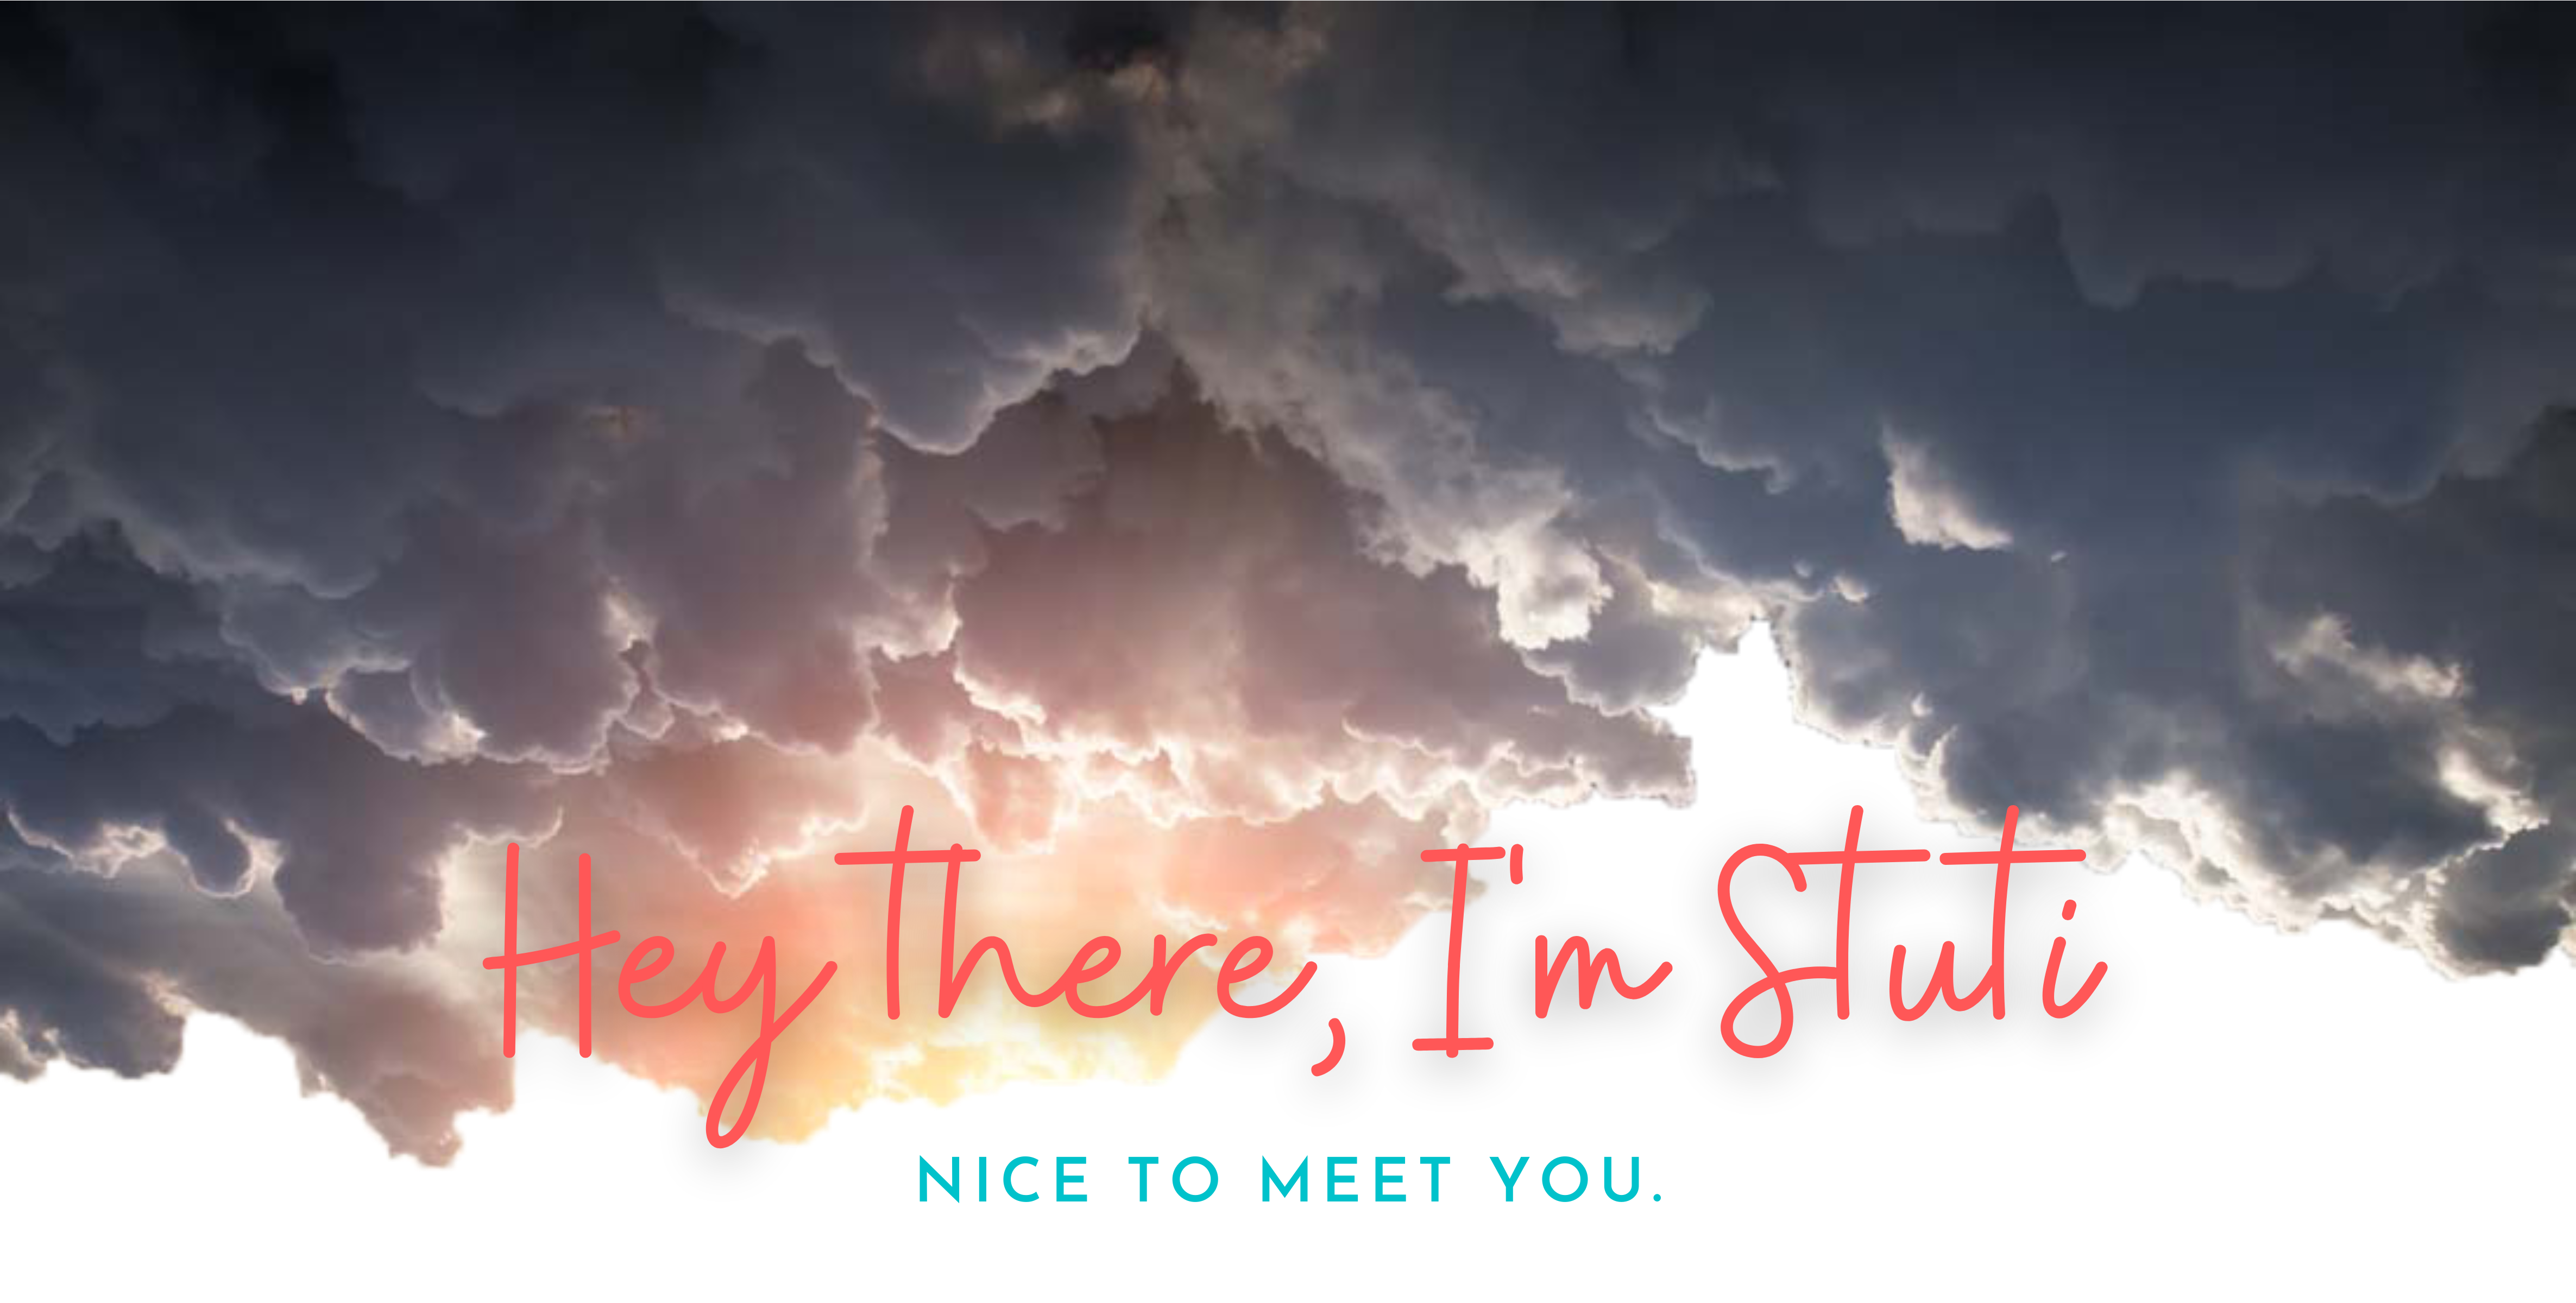 banner that says Hey there, I'm Stuti - NICE TO MEET YOU on top of a cloud background